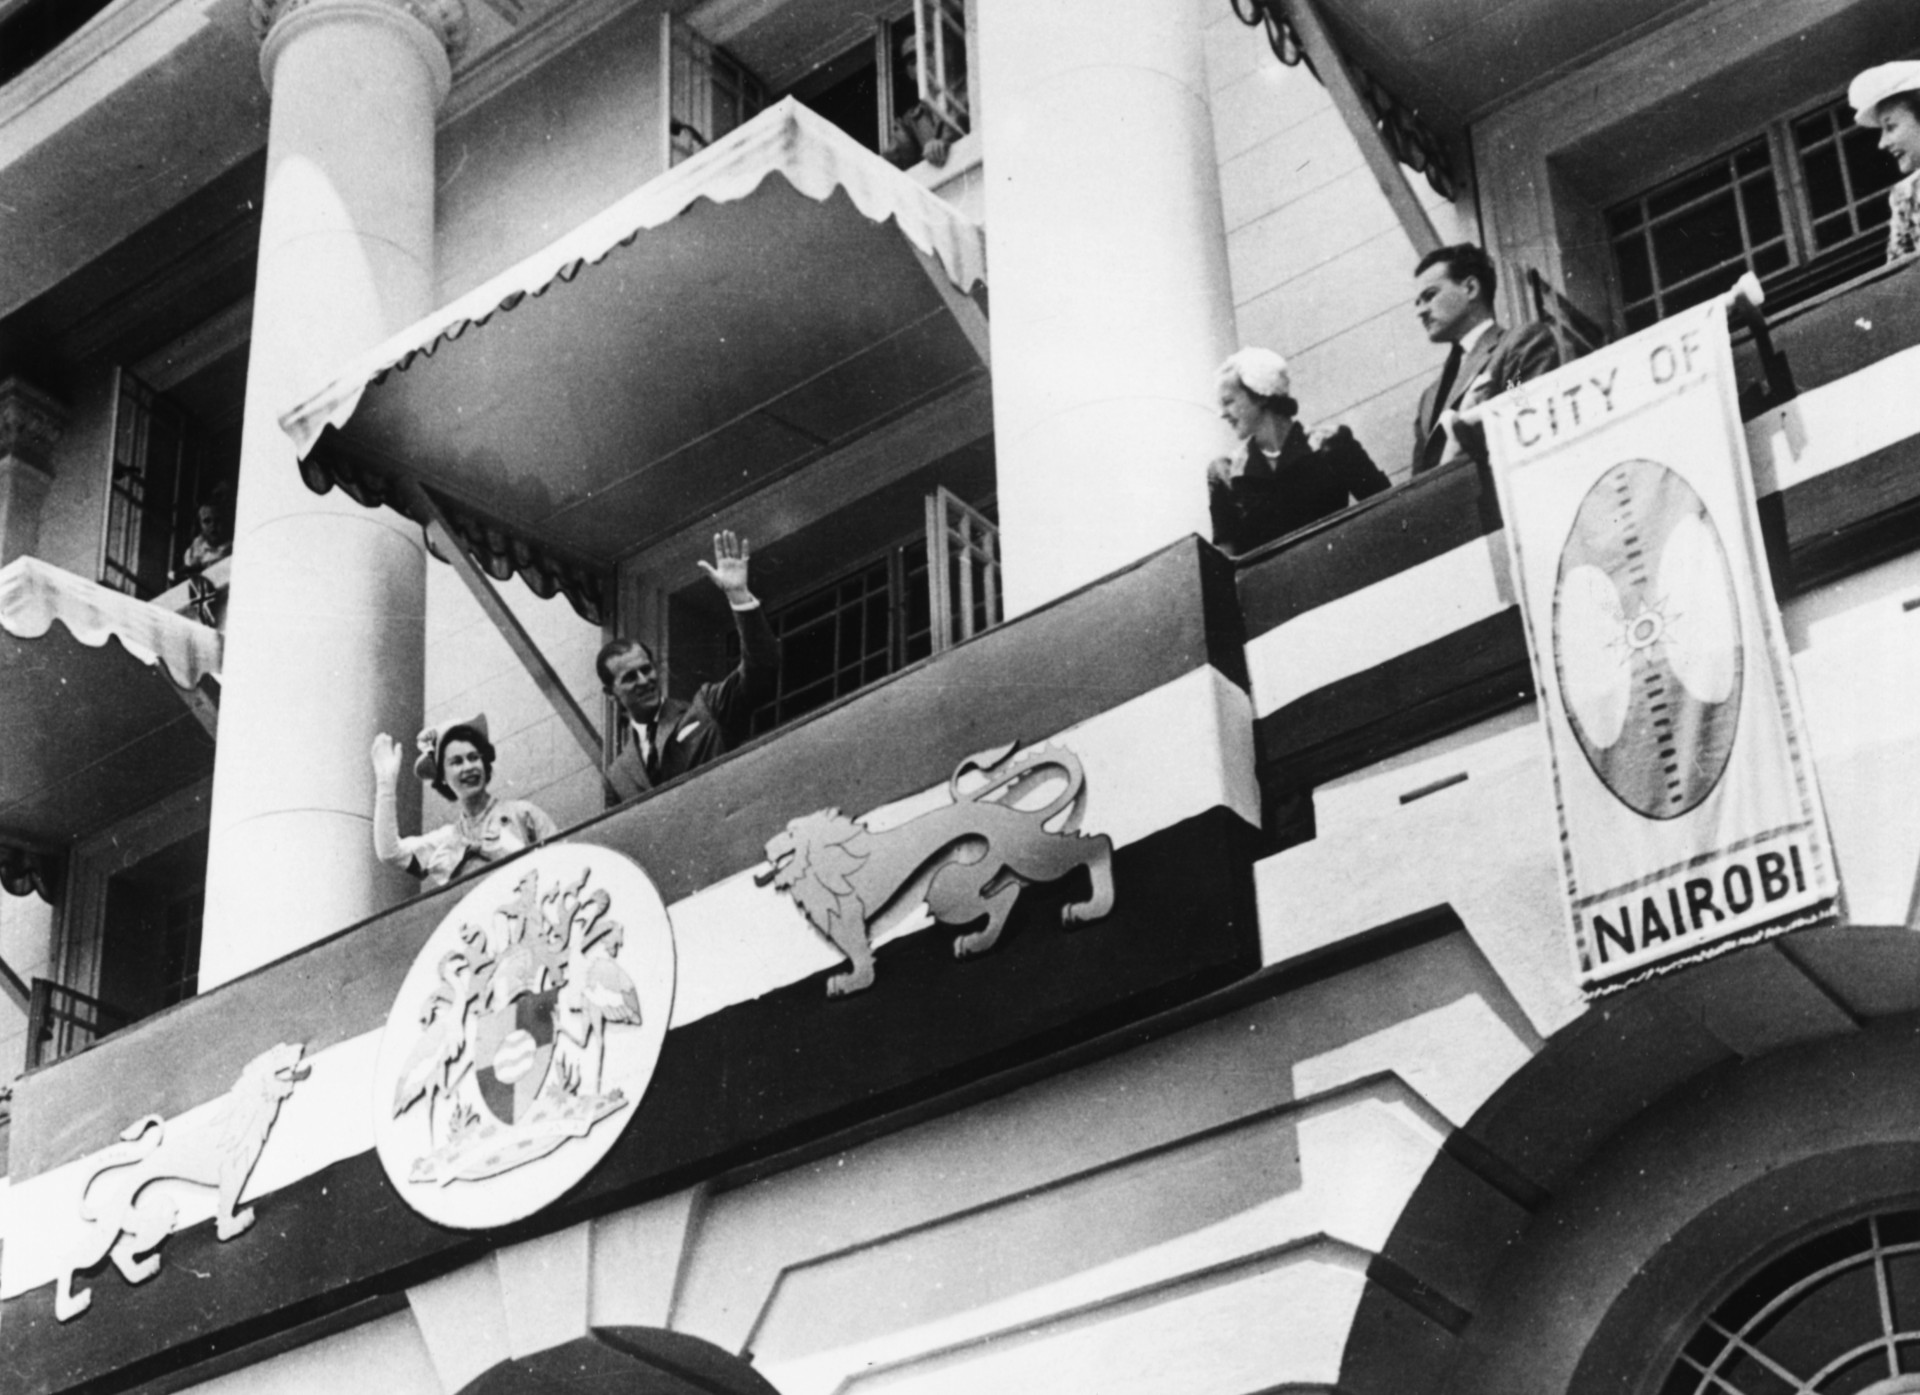 Waving at crowds from the balcony of City Hall, Nairobi.<p><a href="https://www.msn.com/en-za/community/channel/vid-7xx8mnucu55yw63we9va2gwr7uihbxwc68fxqp25x6tg4ftibpra?cvid=94631541bc0f4f89bfd59158d696ad7e">Follow us and access great exclusive content every day</a></p>